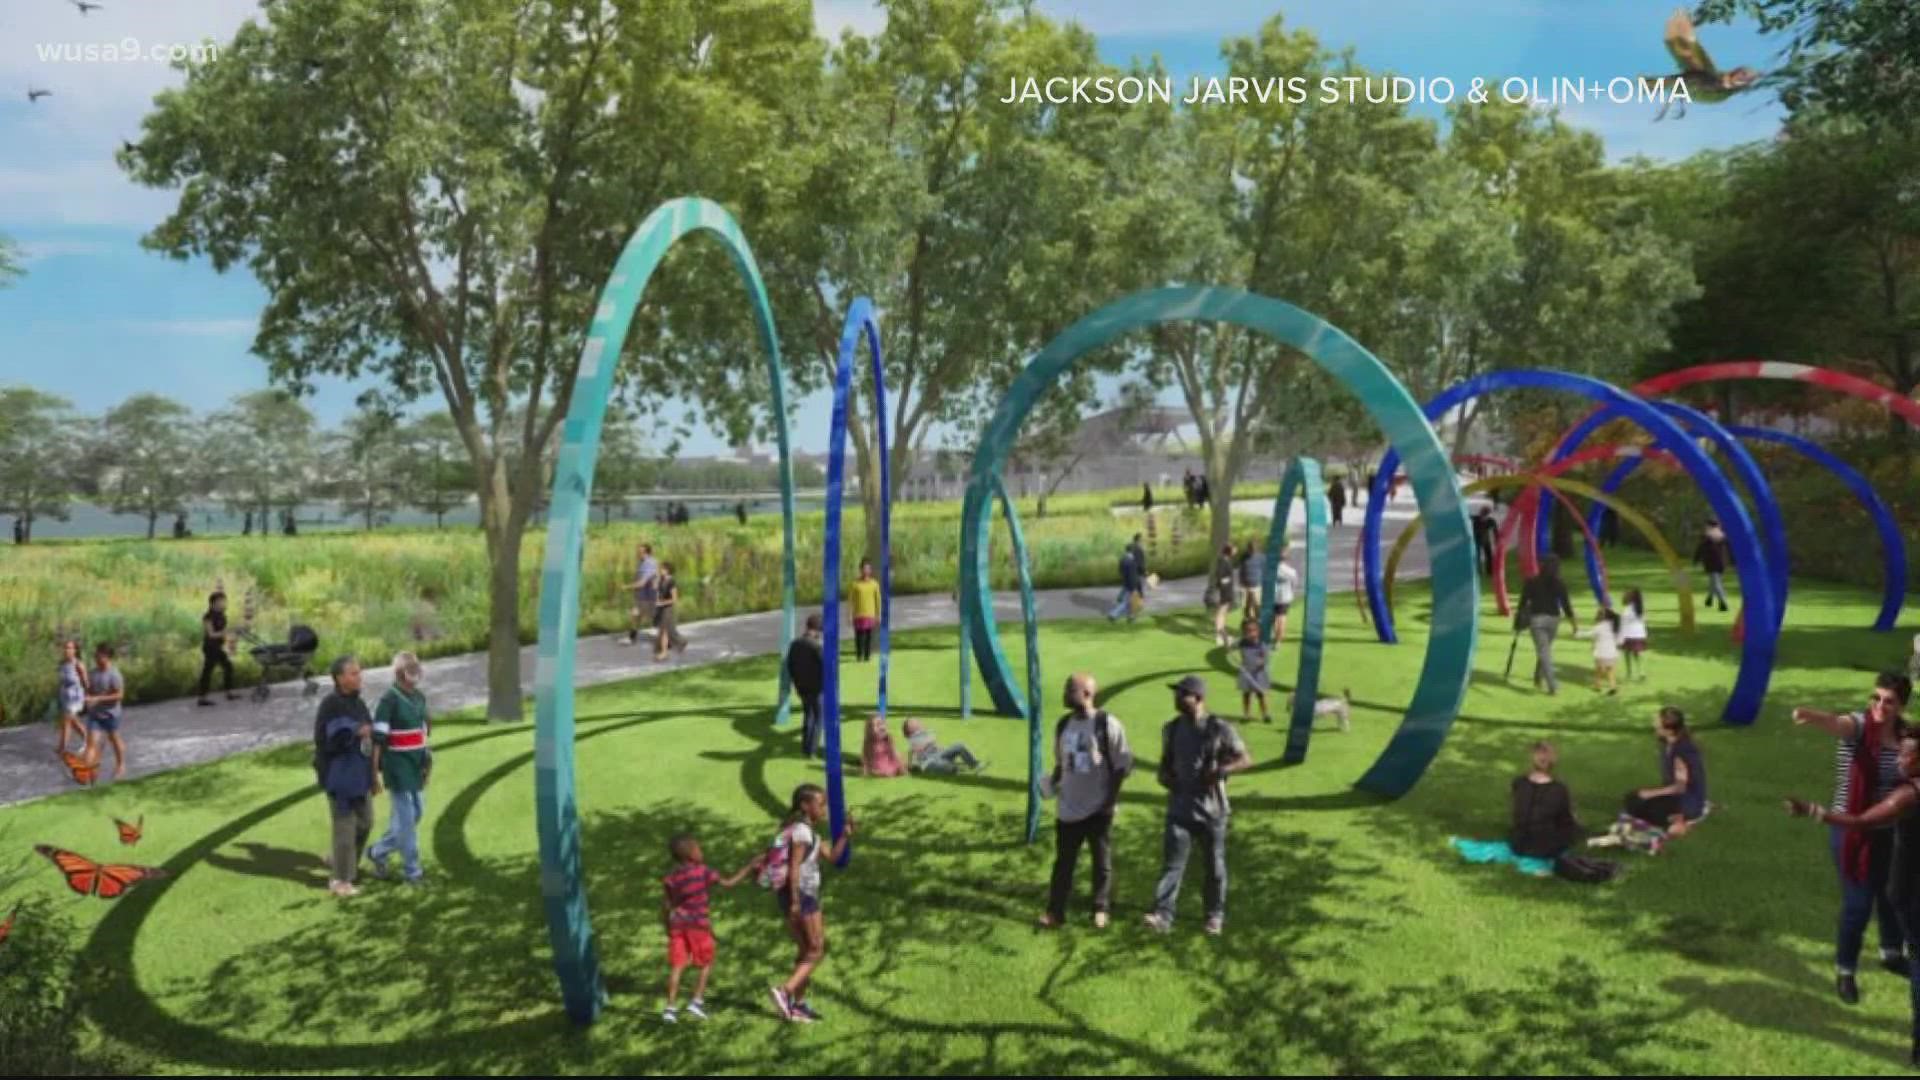 The park is set to open in 2025.